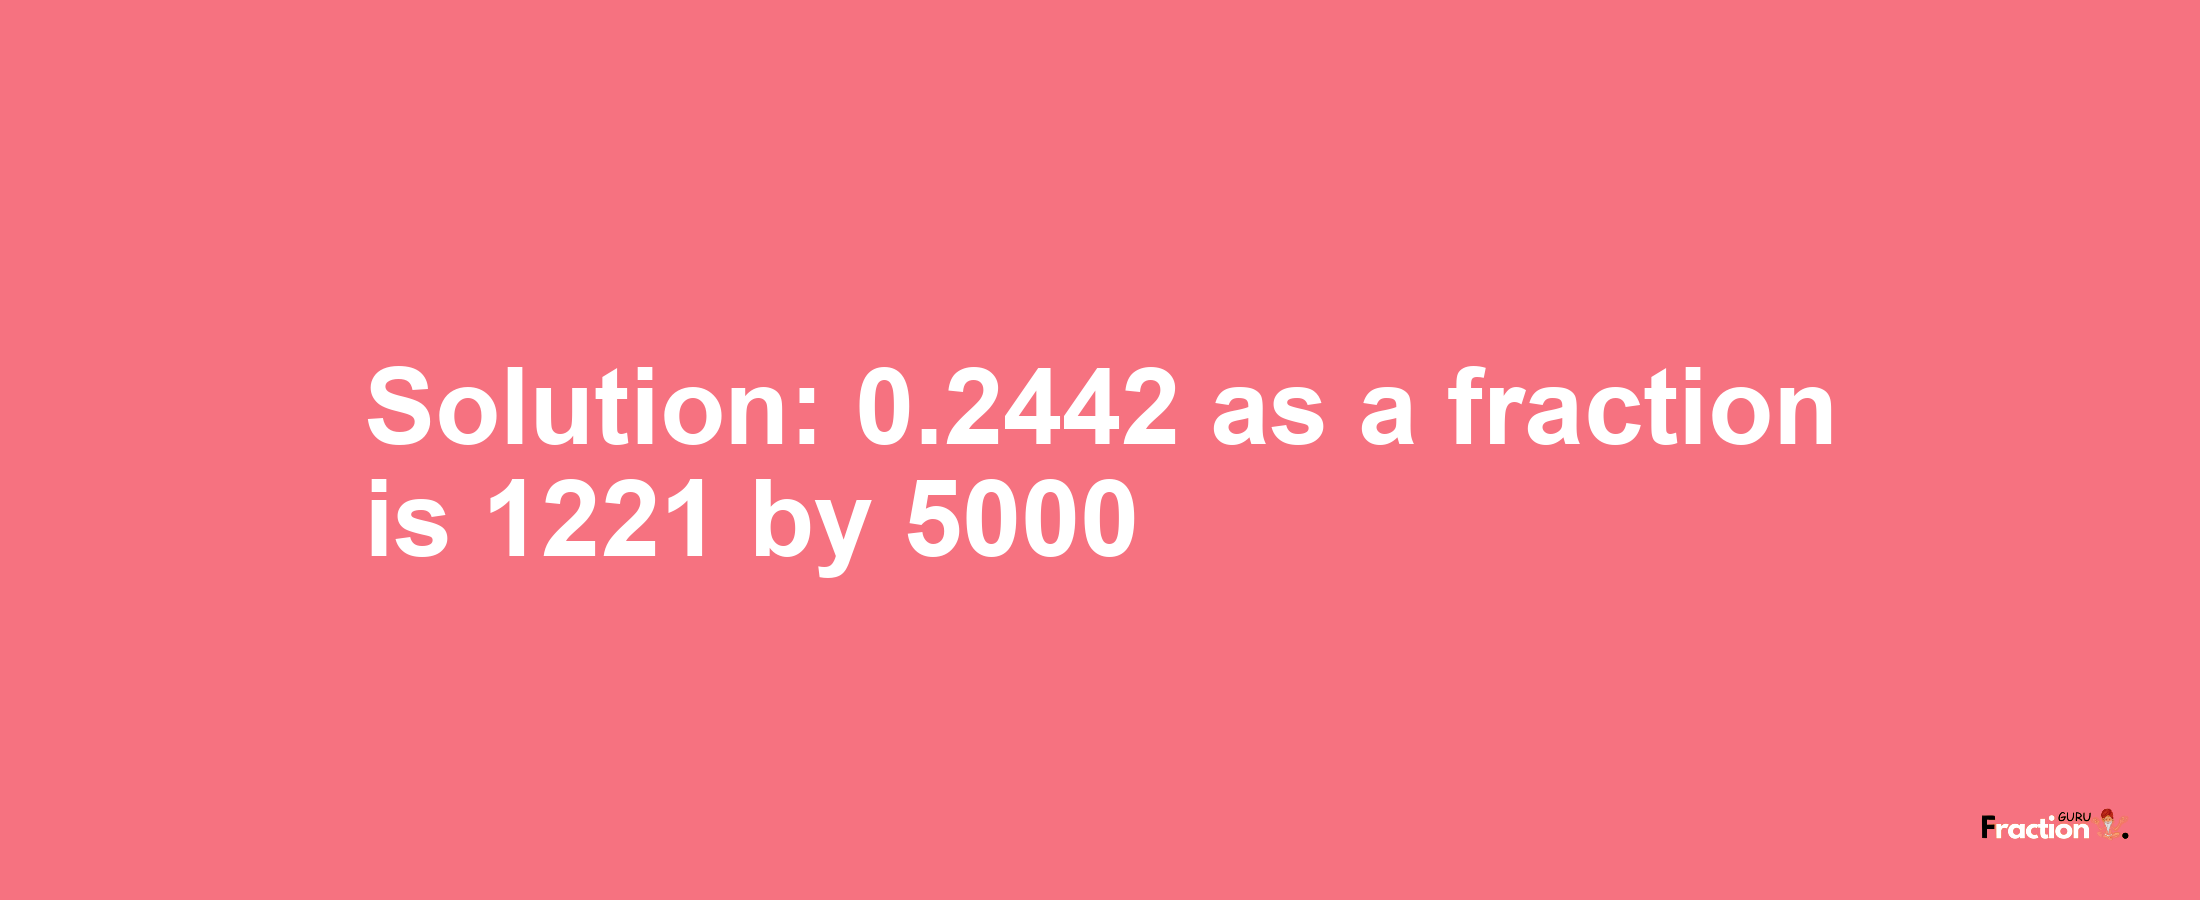 Solution:0.2442 as a fraction is 1221/5000